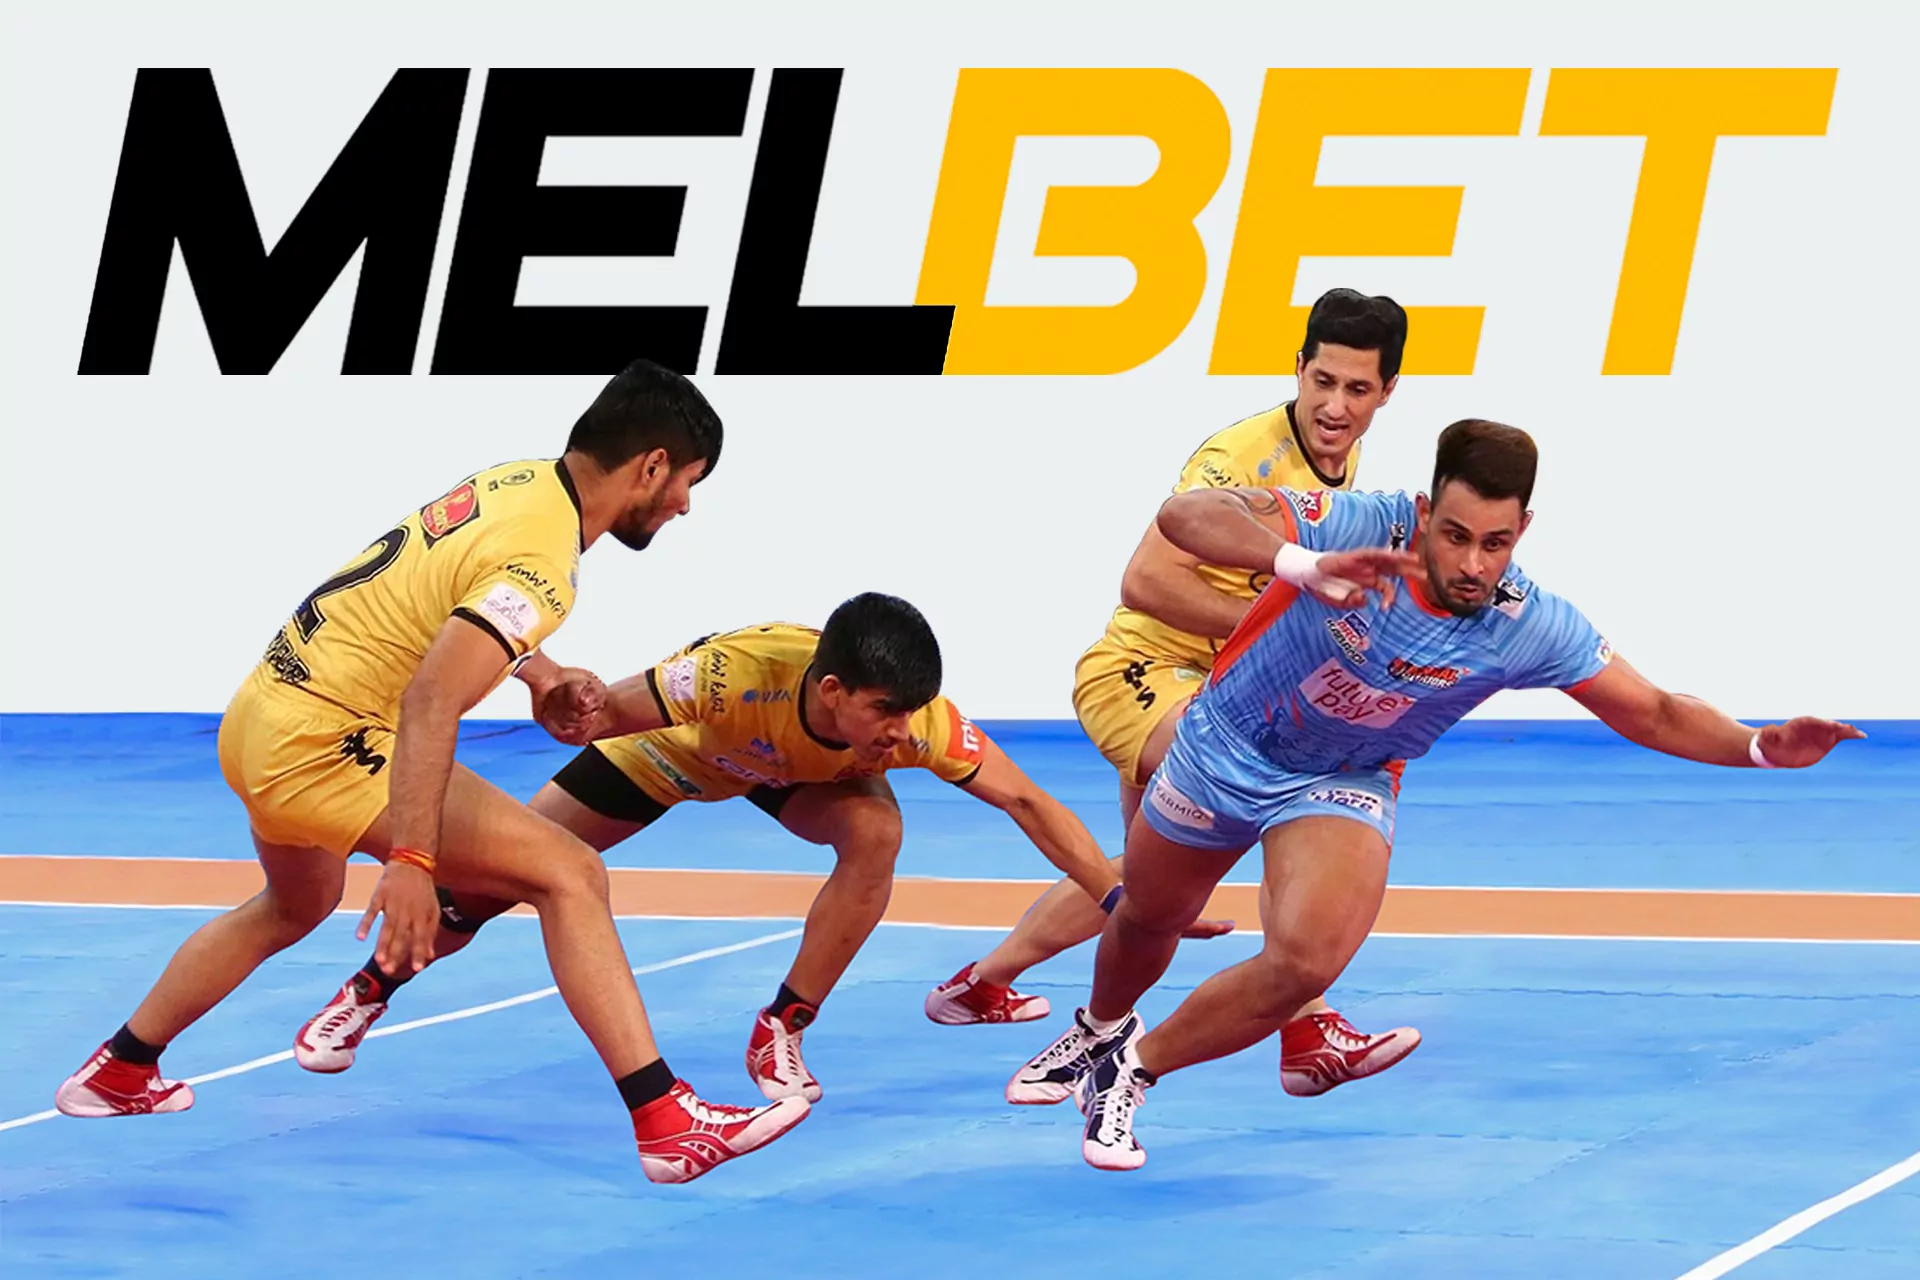 At Melbet you can bet on a number of popular kabaddi tournaments.